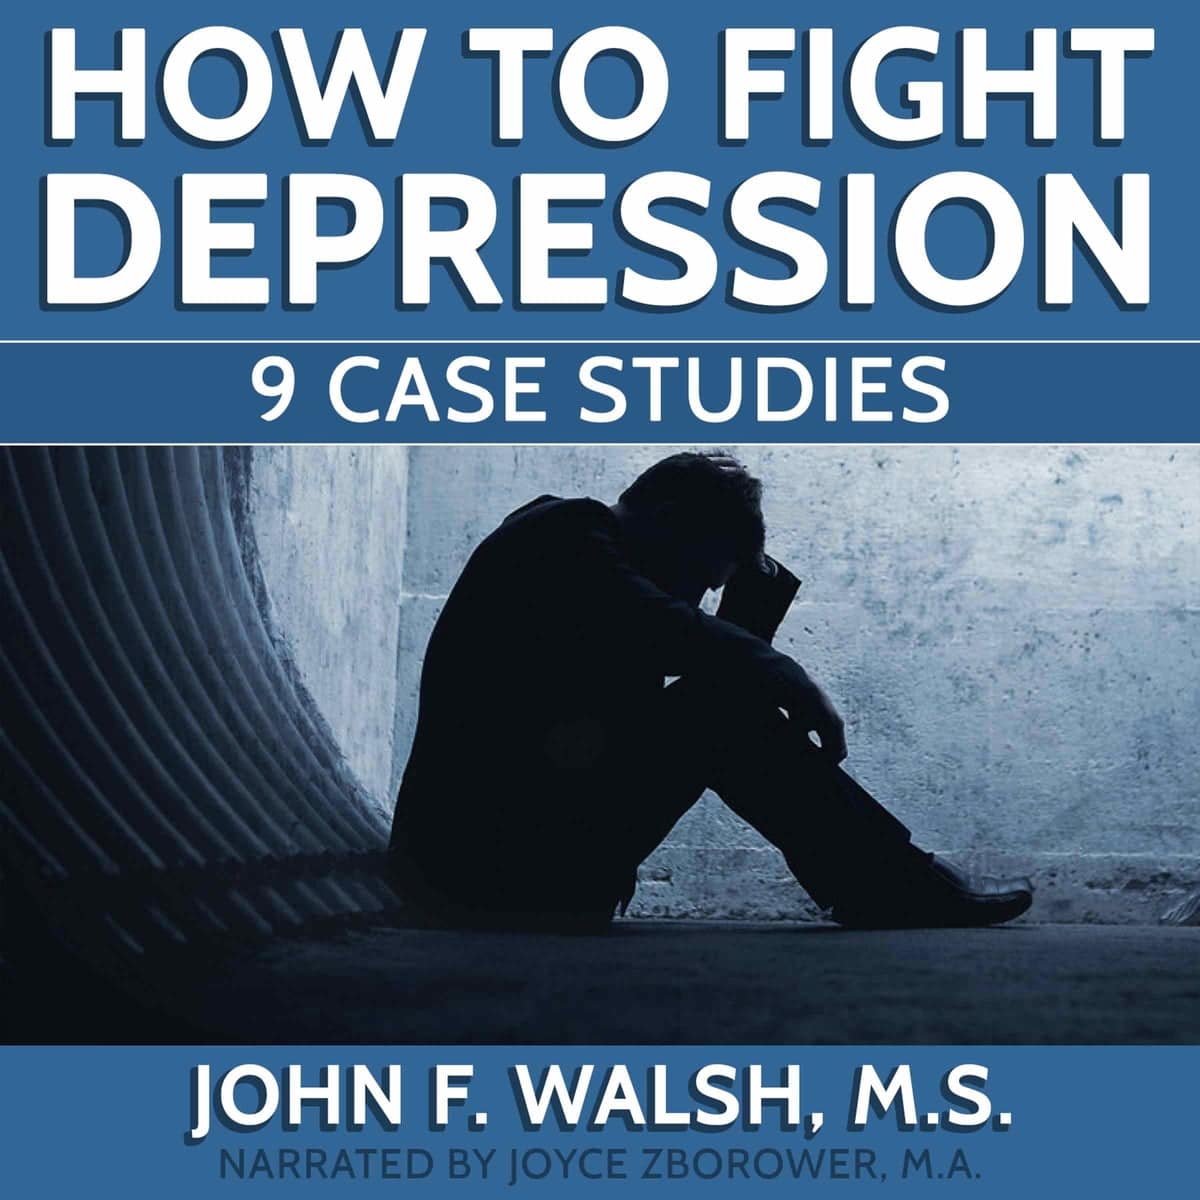 How To Fight Depression